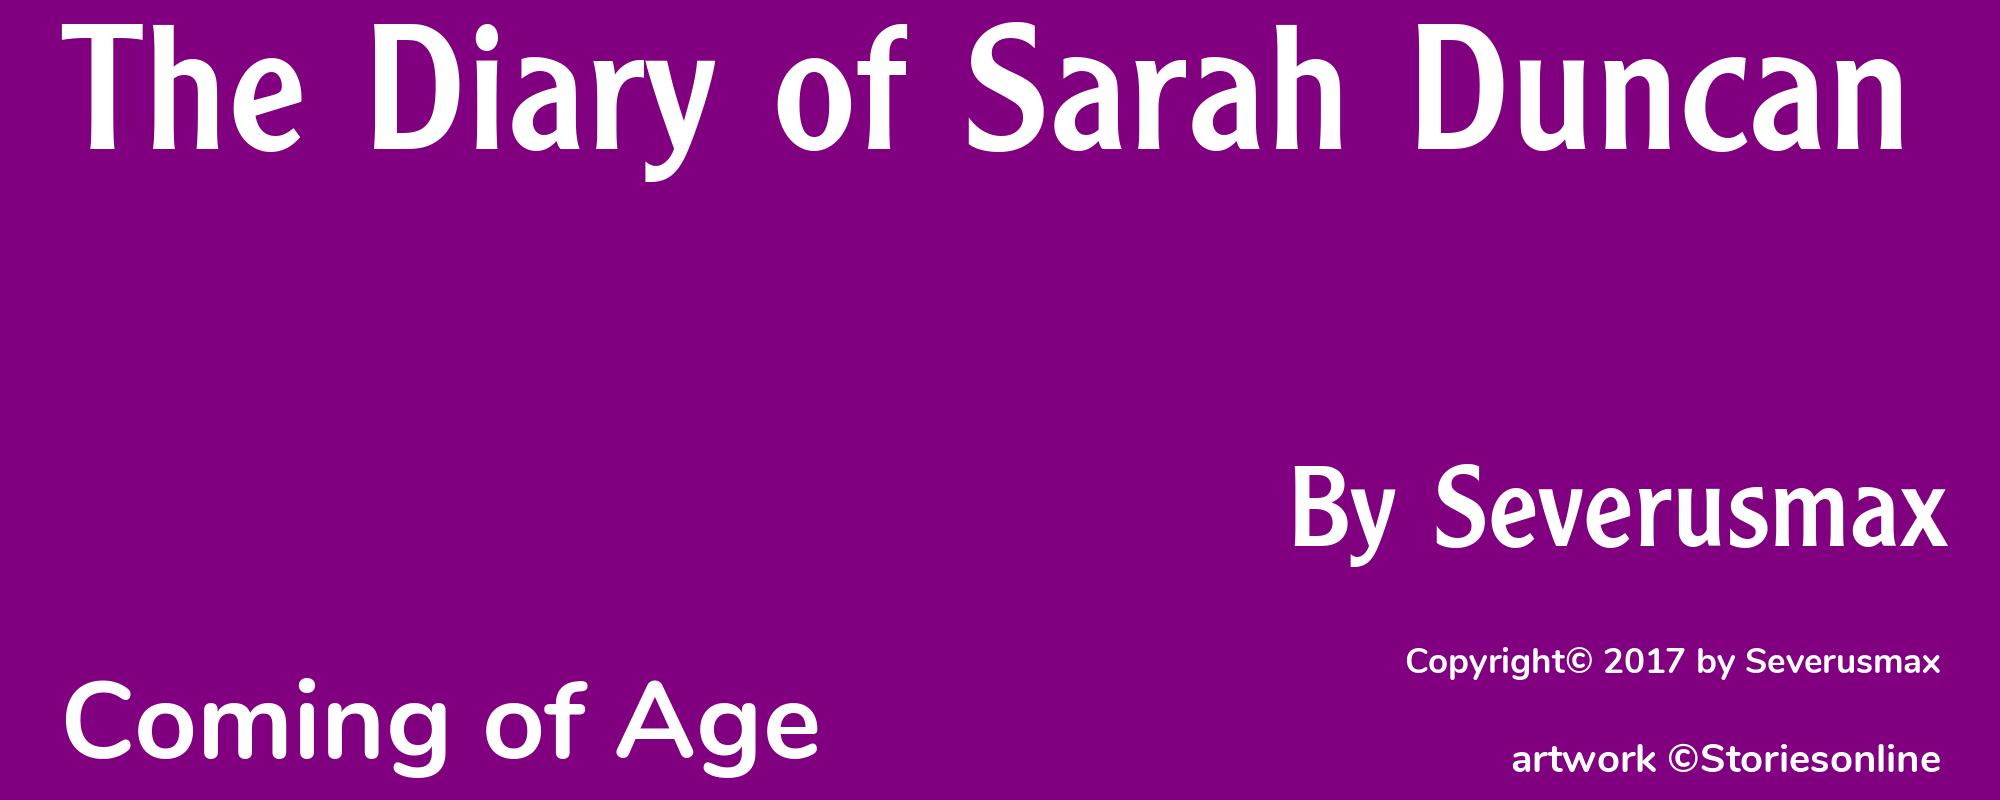 The Diary of Sarah Duncan - Cover